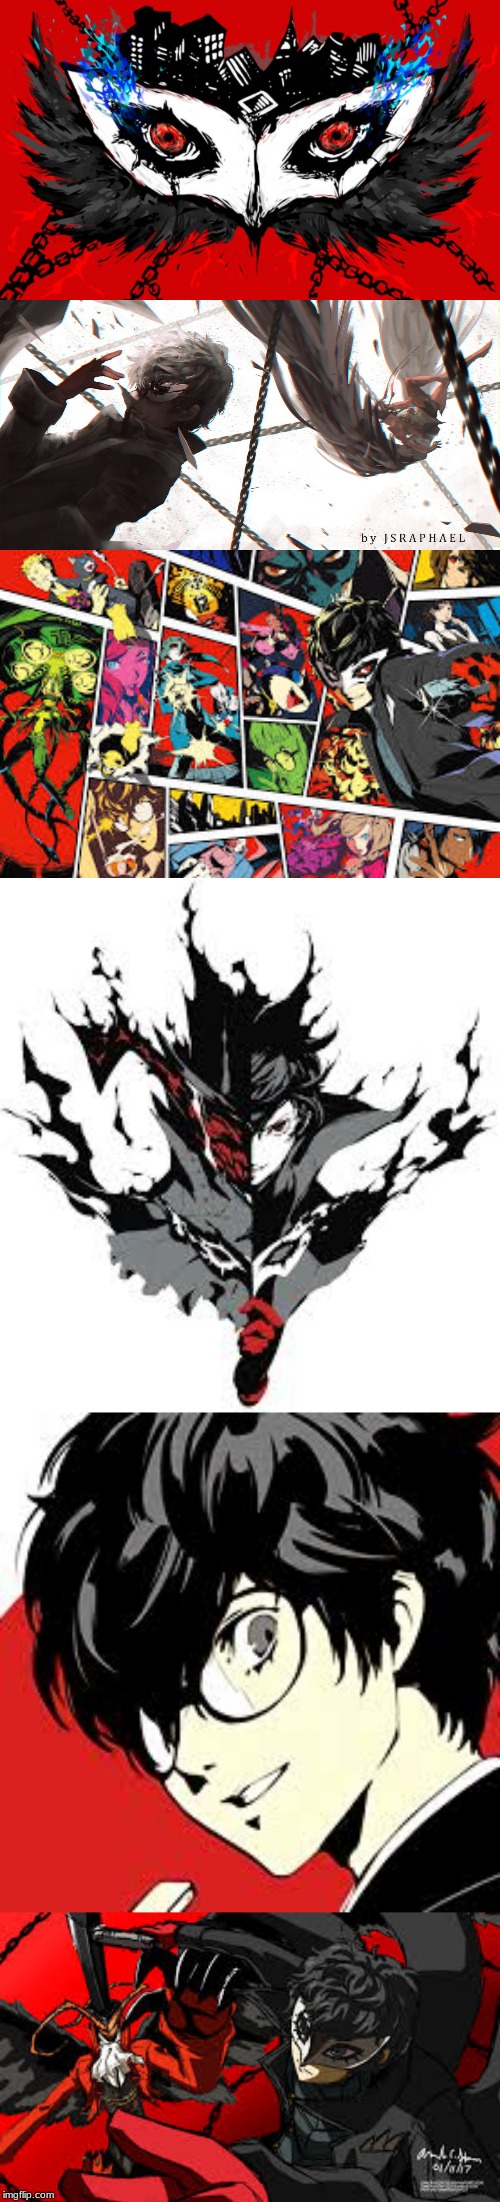 bad Quality persona 5 gallery.
I. LOVE. PERSONA 5 | image tagged in j s raphael,persona 5,hd,joker,arsene,galleries | made w/ Imgflip meme maker